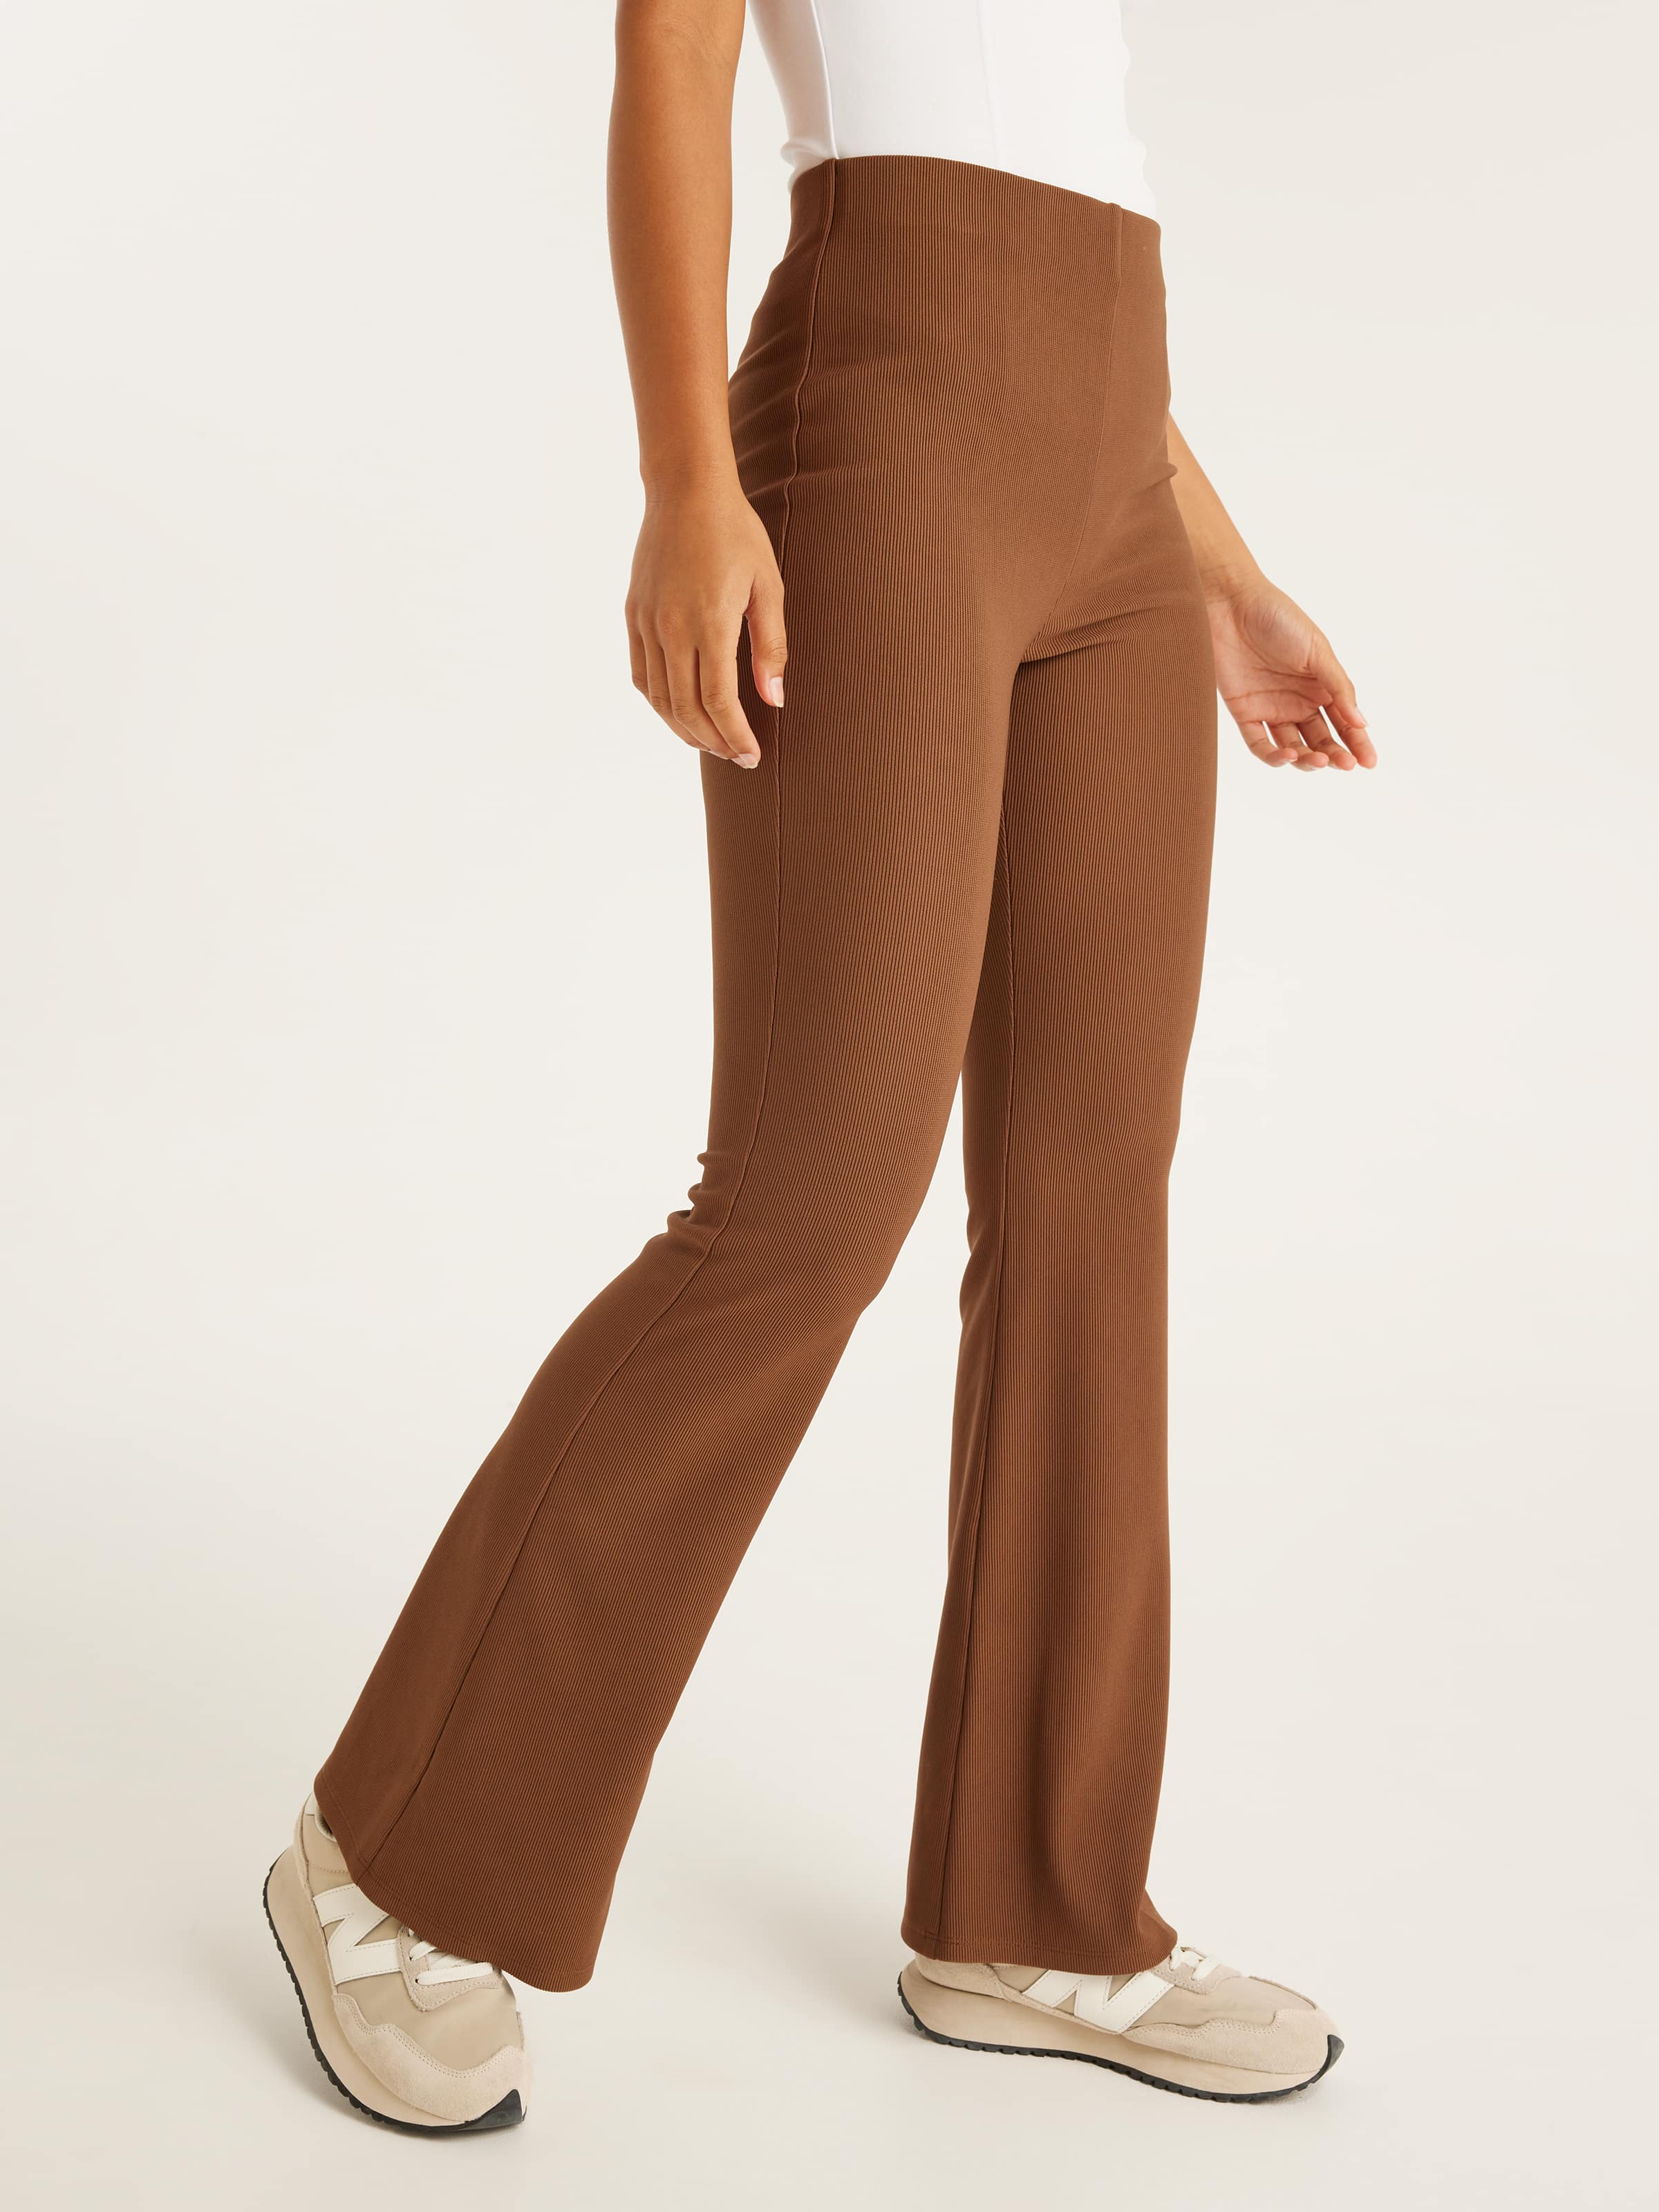 Selected Femme cotton blend tailored wide leg pants in chocolate brown   BROWN  ASOS